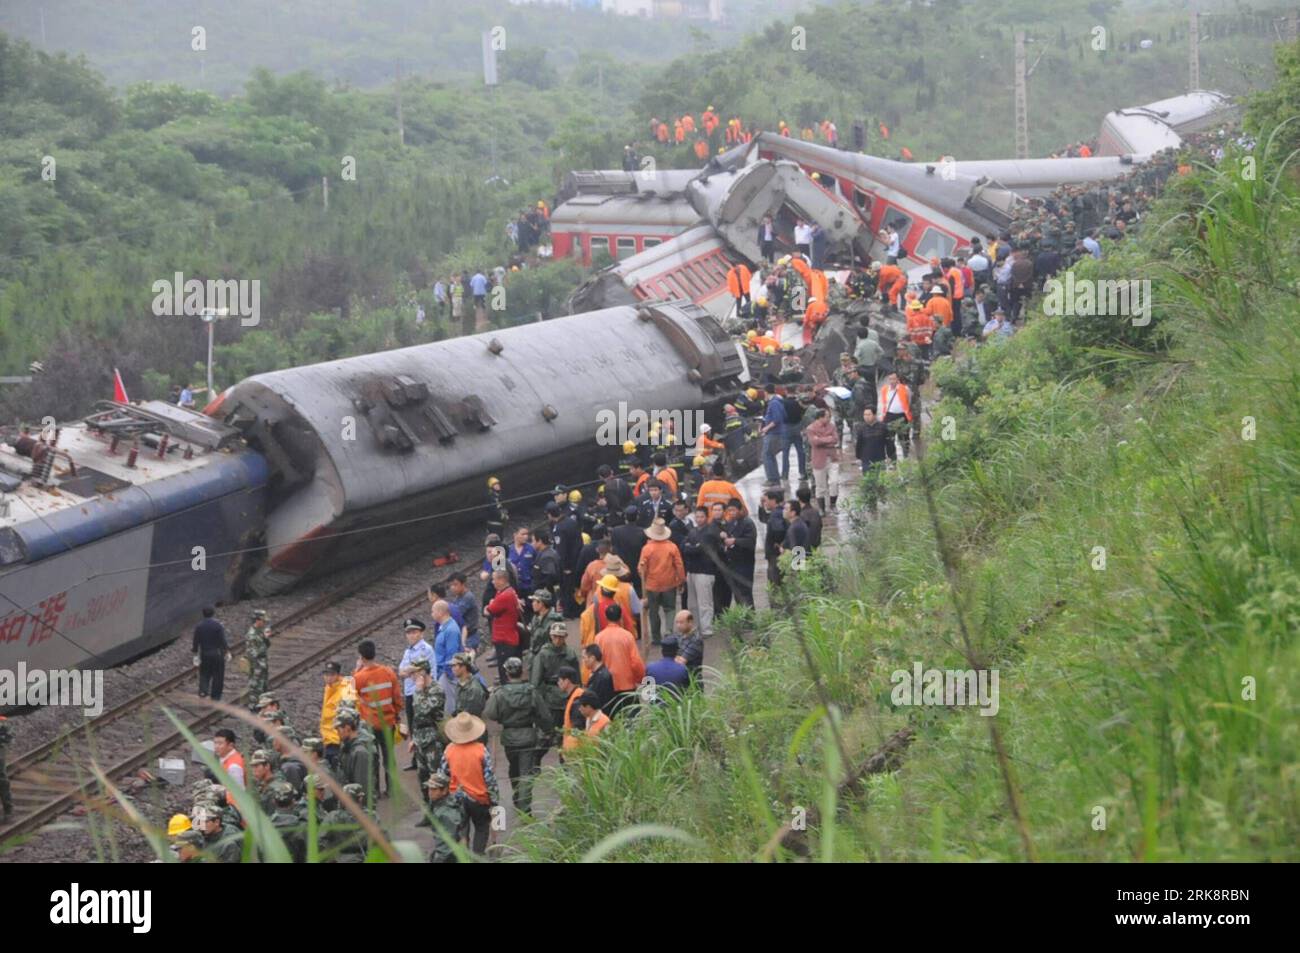 Bildnummer: 54070693  Datum: 23.05.2010  Copyright: imago/Xinhua (100523) -- DONGXIANG, May 23, 2010 (Xinhua) -- Rescuers work at the site where a passenger train derailed in Dongxiang County, east China s Jiangxi Province, May 23, 2010. At least three were killed, 10 more injured in Dongxiang when a passenger train derailed after being hit by landslides at Sunday dawn, authorities said. (Xinhua/Chen Chunyuan) (jl) CHINA-JIANGXI-TRAIN-ACCIDENT (CN) PUBLICATIONxNOTxINxCHN Verkehr Bahn Unglück kbdig xkg 2010 quer premiumd xint o0 Zugunglück Totale Entgleisung entgleisen entgleist    Bildnummer 5 Stock Photo